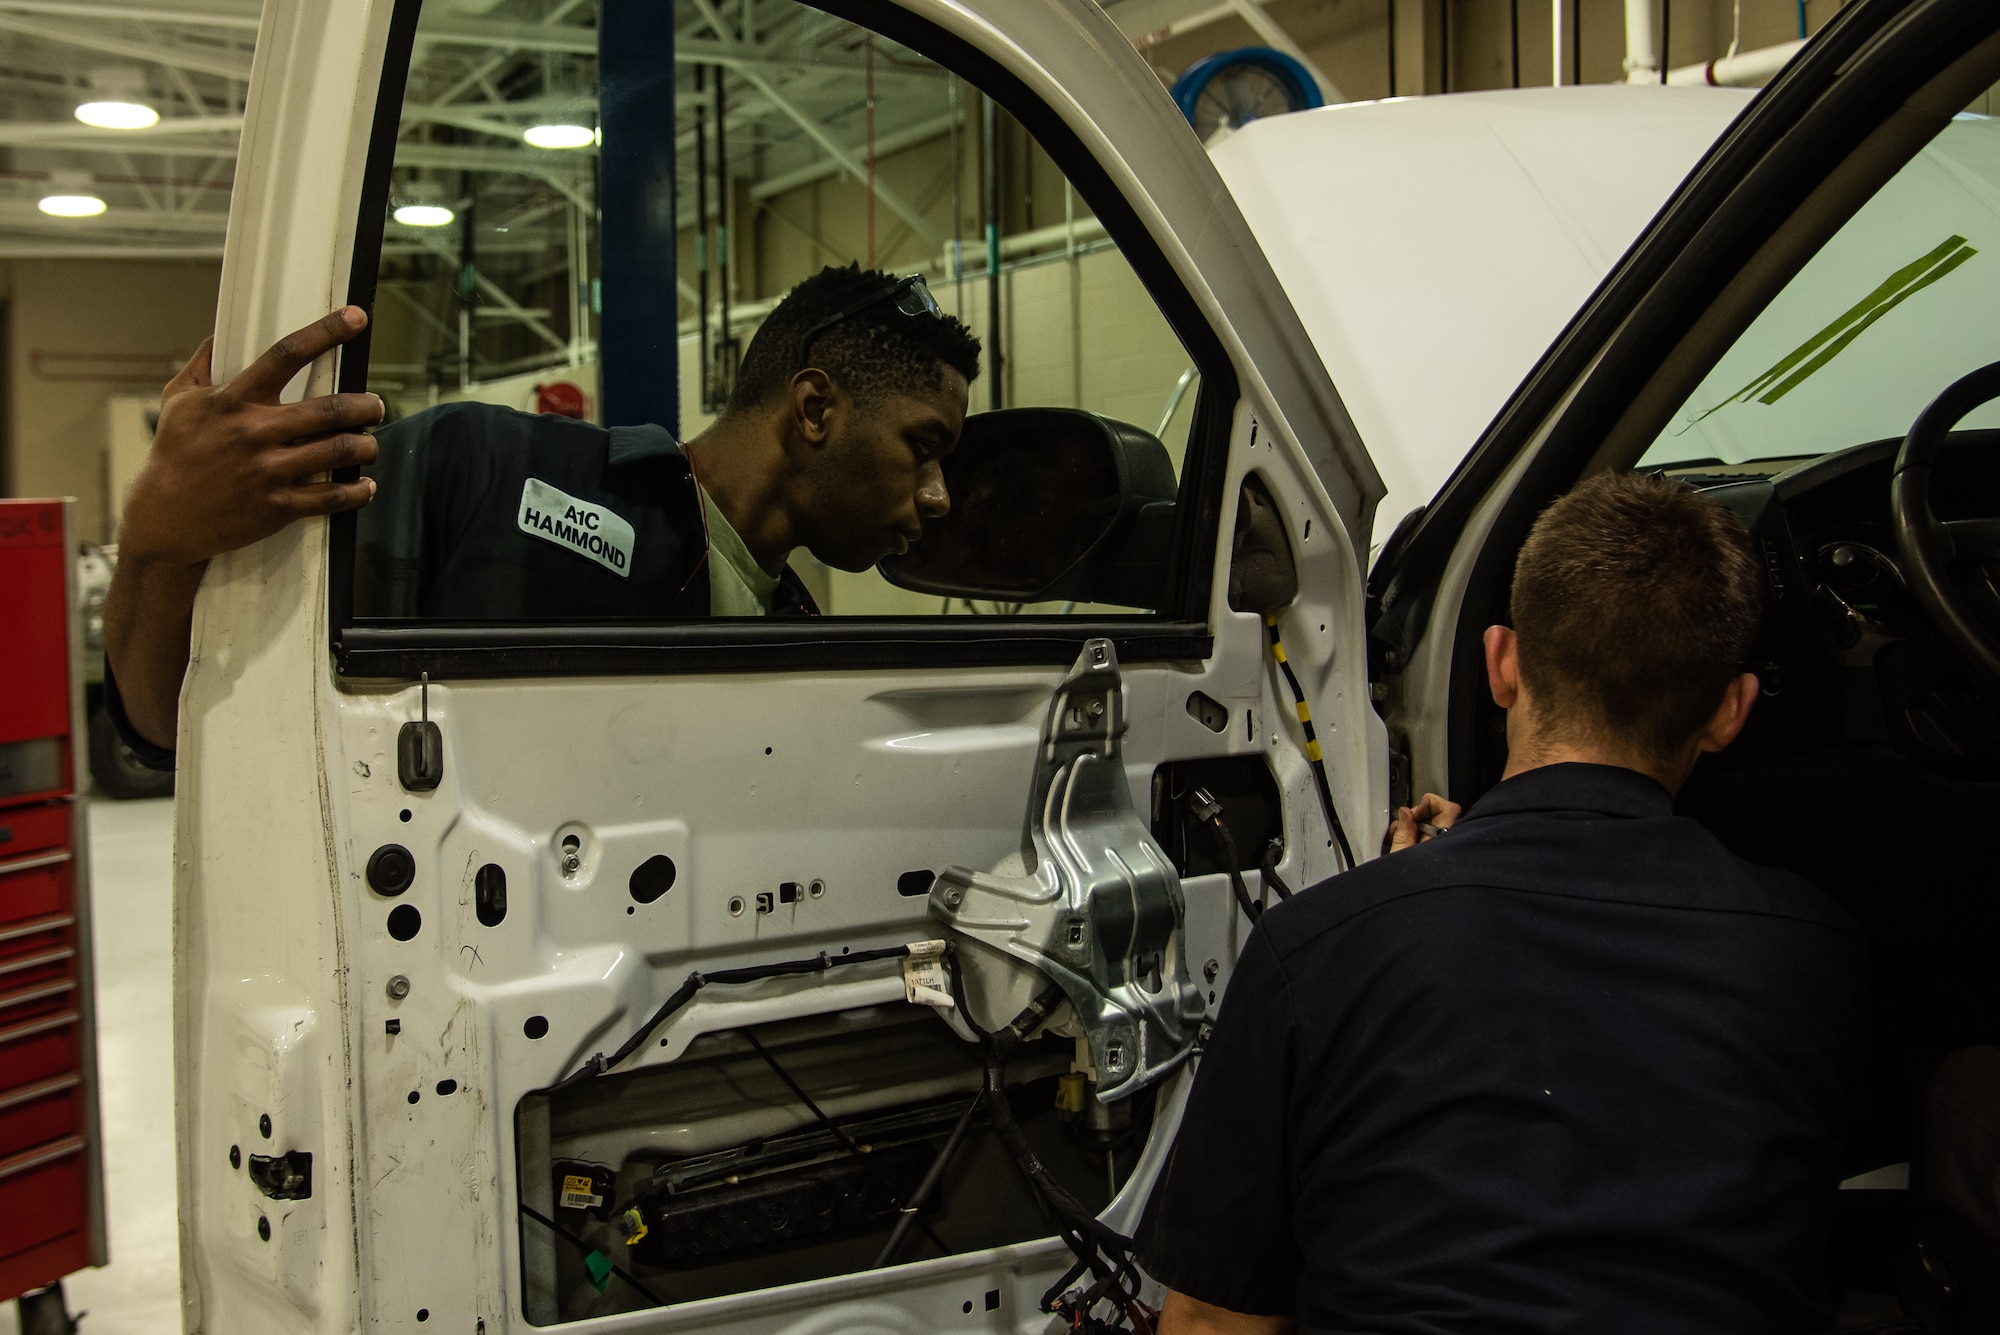 U.S. Air Force Airman 1st Class Darius Hammond, 20th Logistics Readiness Squadron vehicle maintenance apprentice, left, holds a door while Airman 1st Class Brady McGrail, 20th LRS firetruck and refueling truck mechanic tightens a bolt at Shaw Air Force Base, S.C., Dec. 20, 2018.